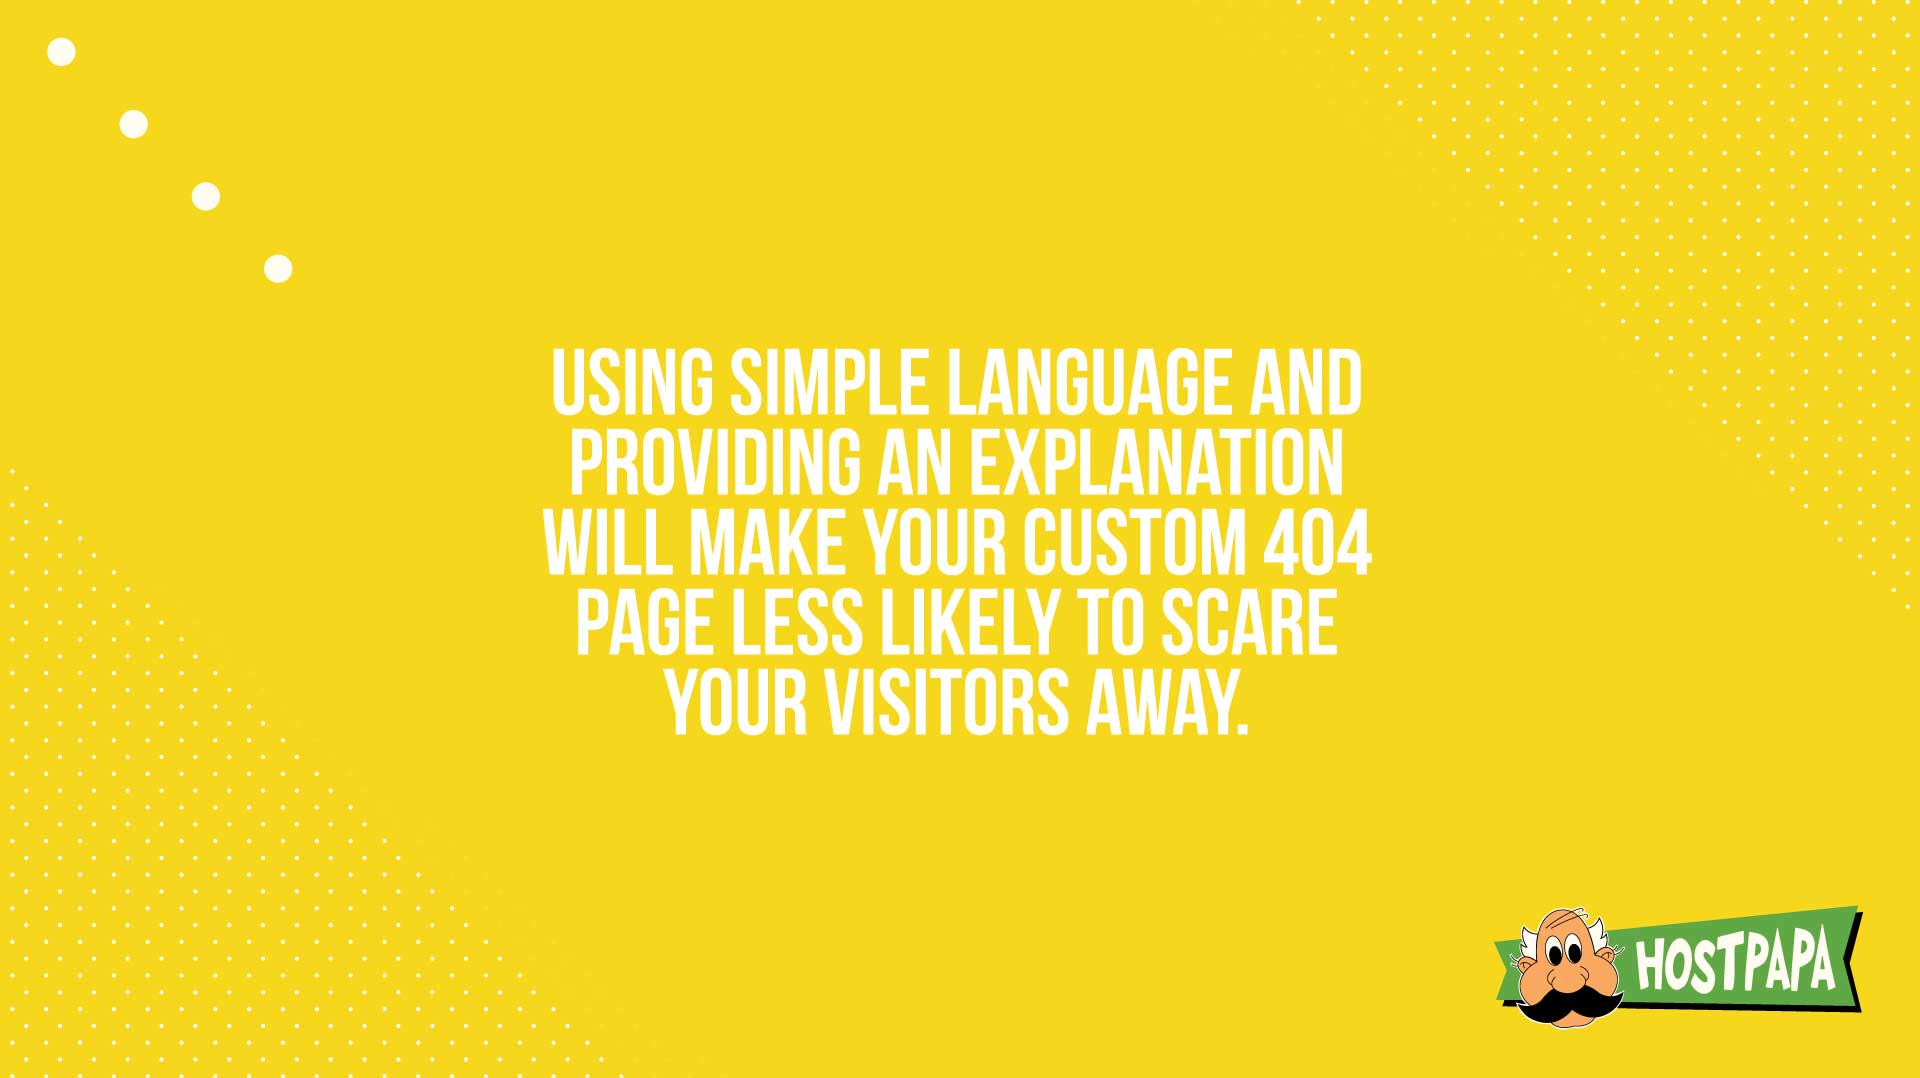 Using simple language will make your 404 page less likely to scare your visitors